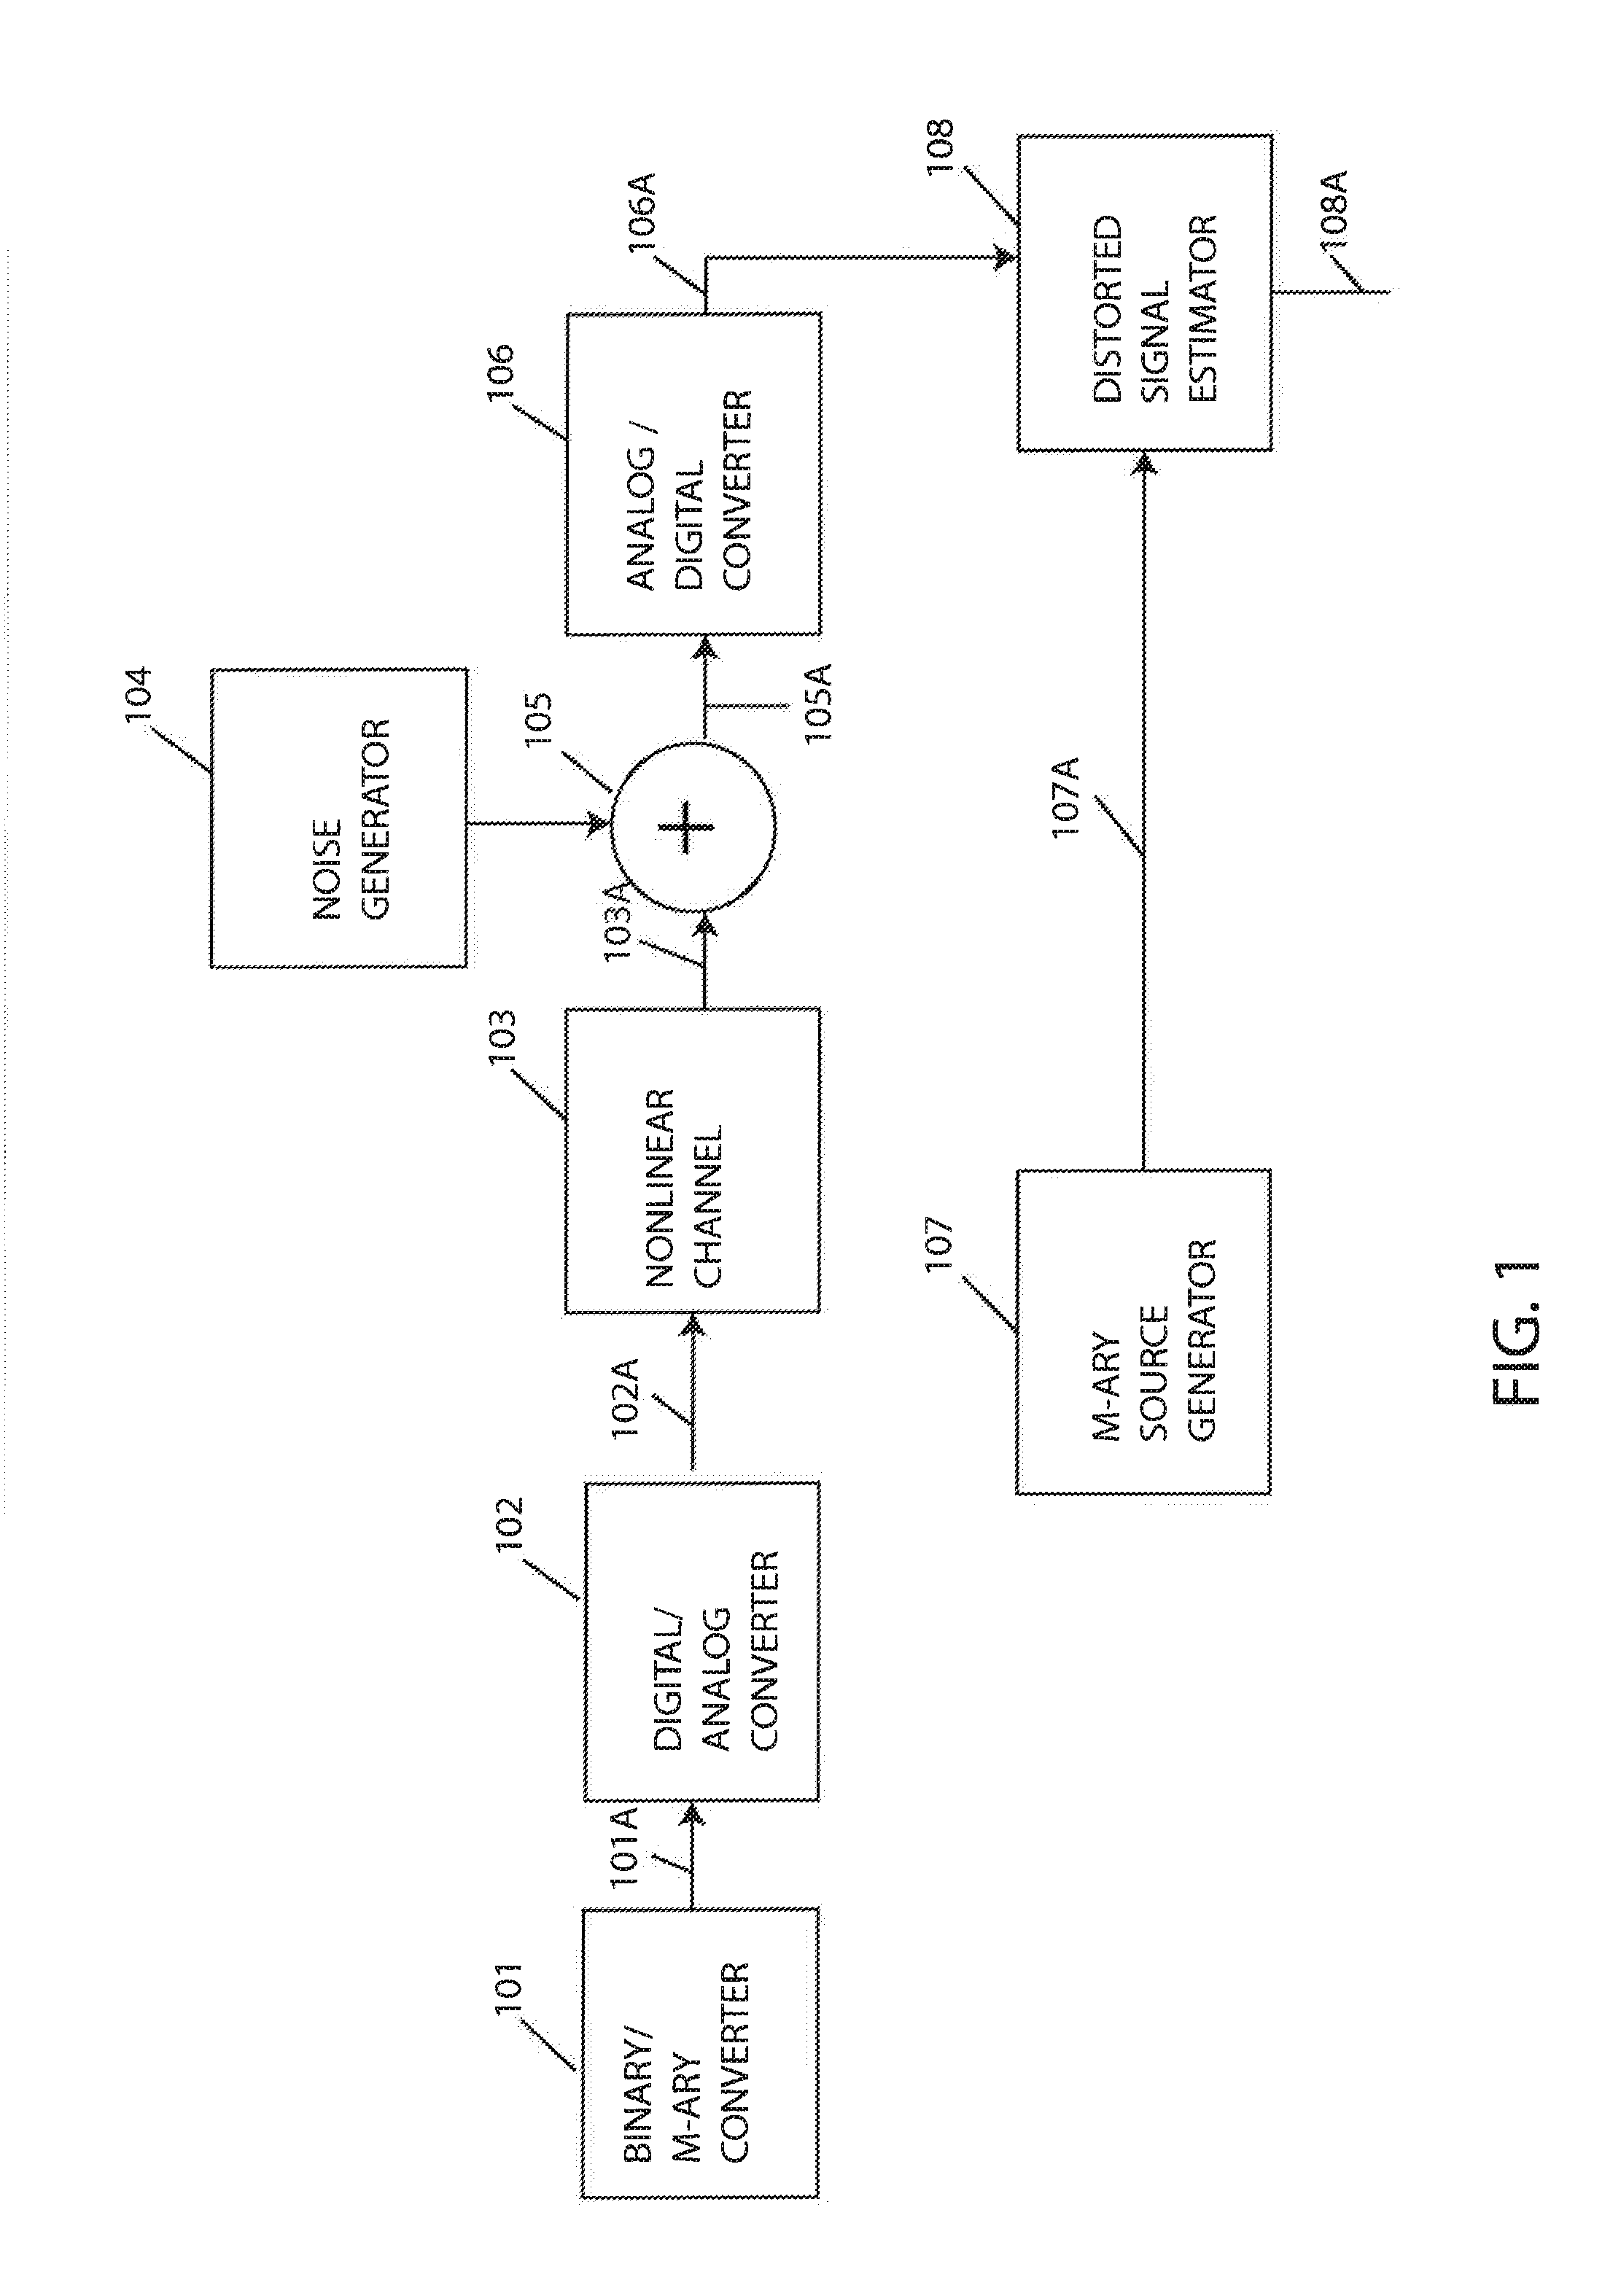 Method and apparatus for nonlinear-channel identification and estimation of nonlinear-distorted signals